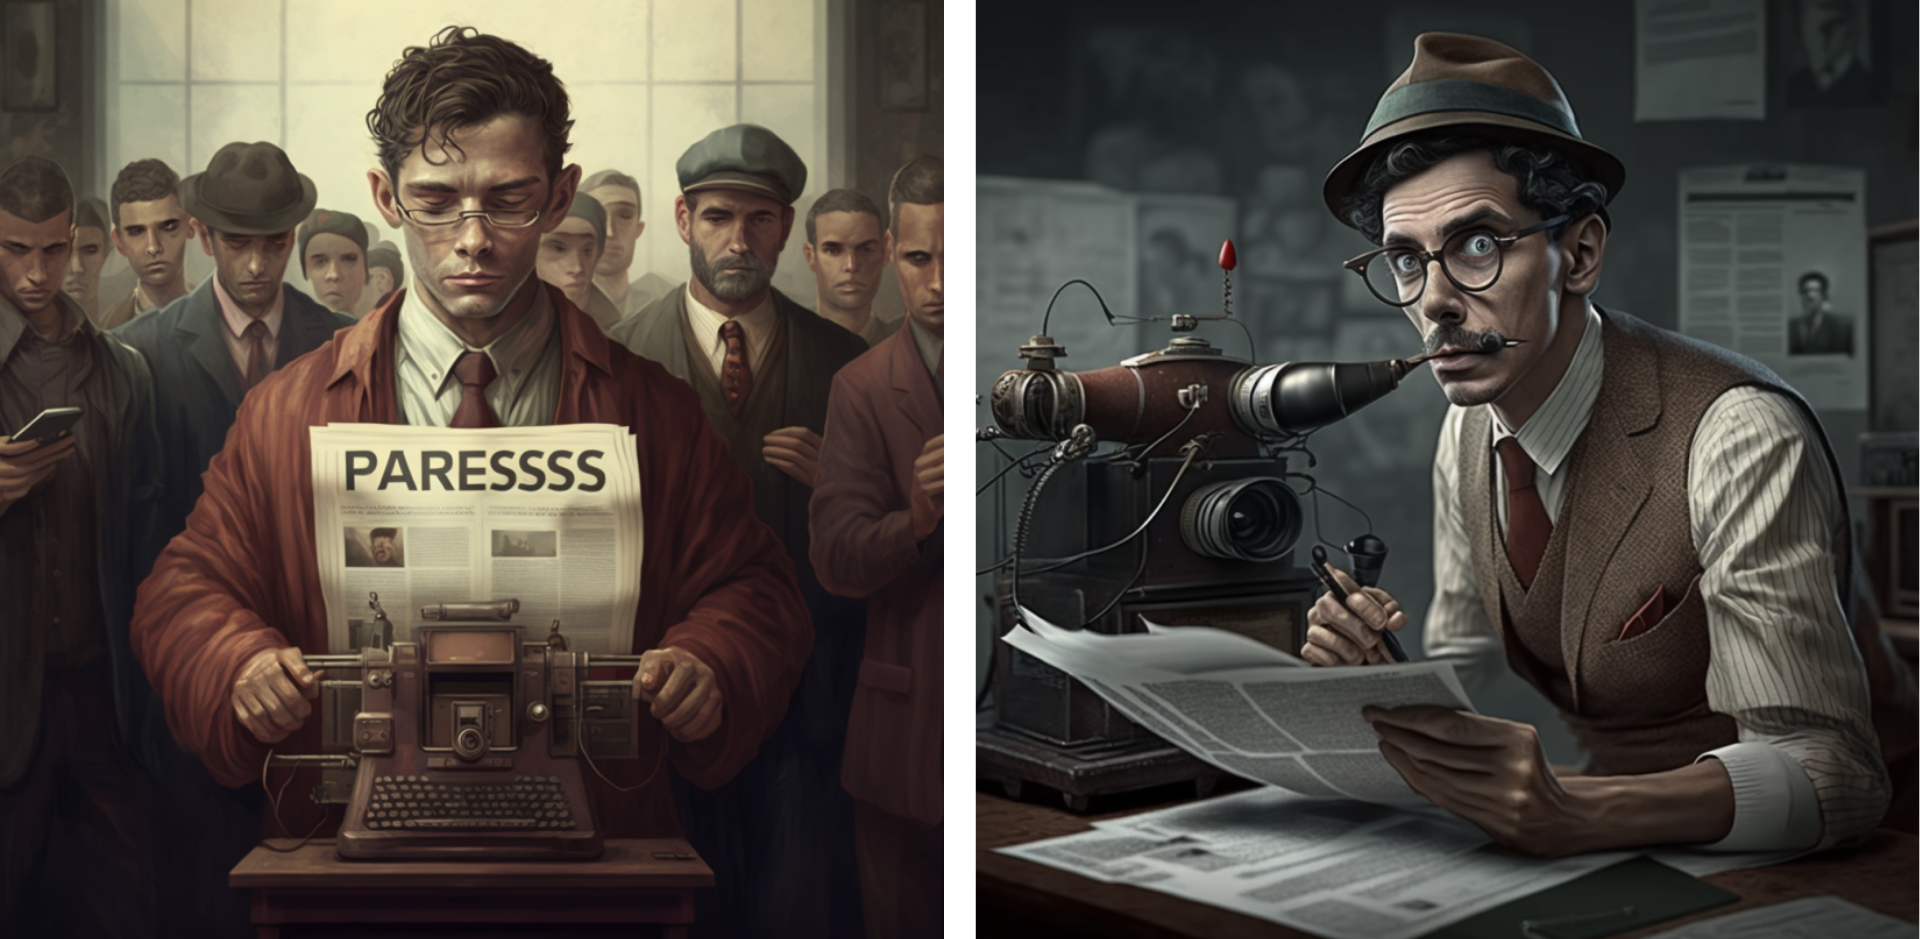 AI used anachronistic technology, including vintage cameras, typewriters and printing presses, when depicting certain occupations such as the press (left) and journalist (right)